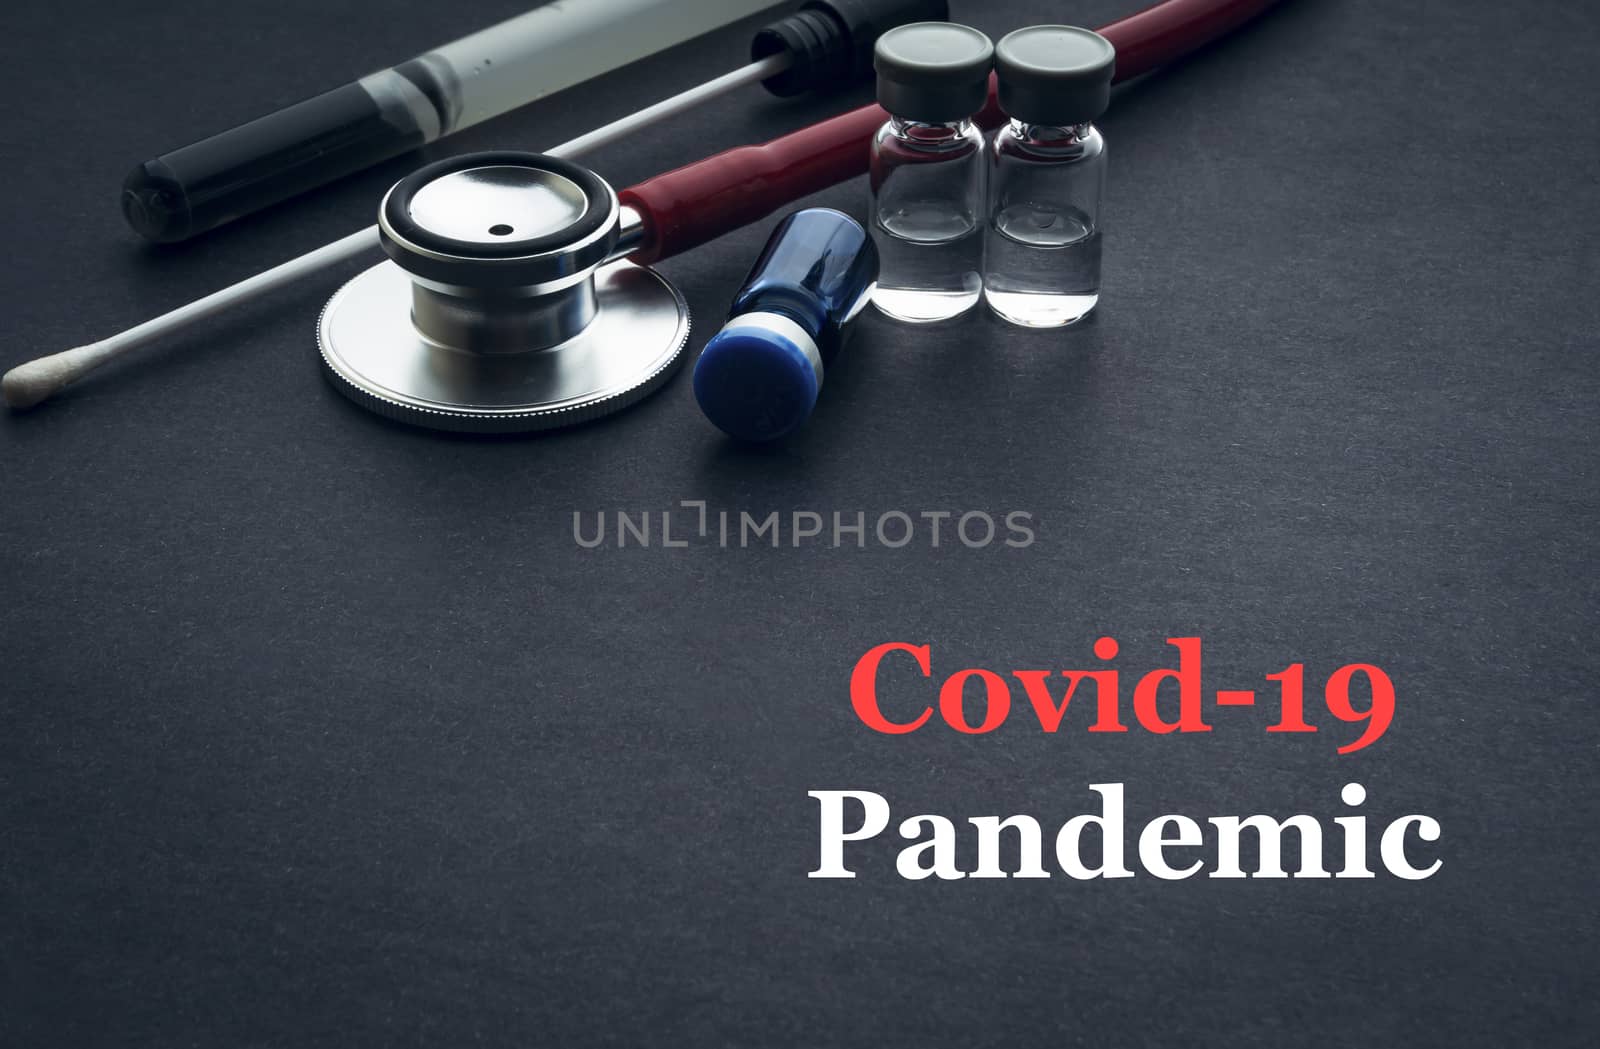 COVID-19 or CORONAVIRUS PANDEMIC text with stethoscope, medical swab and vial on black background by silverwings